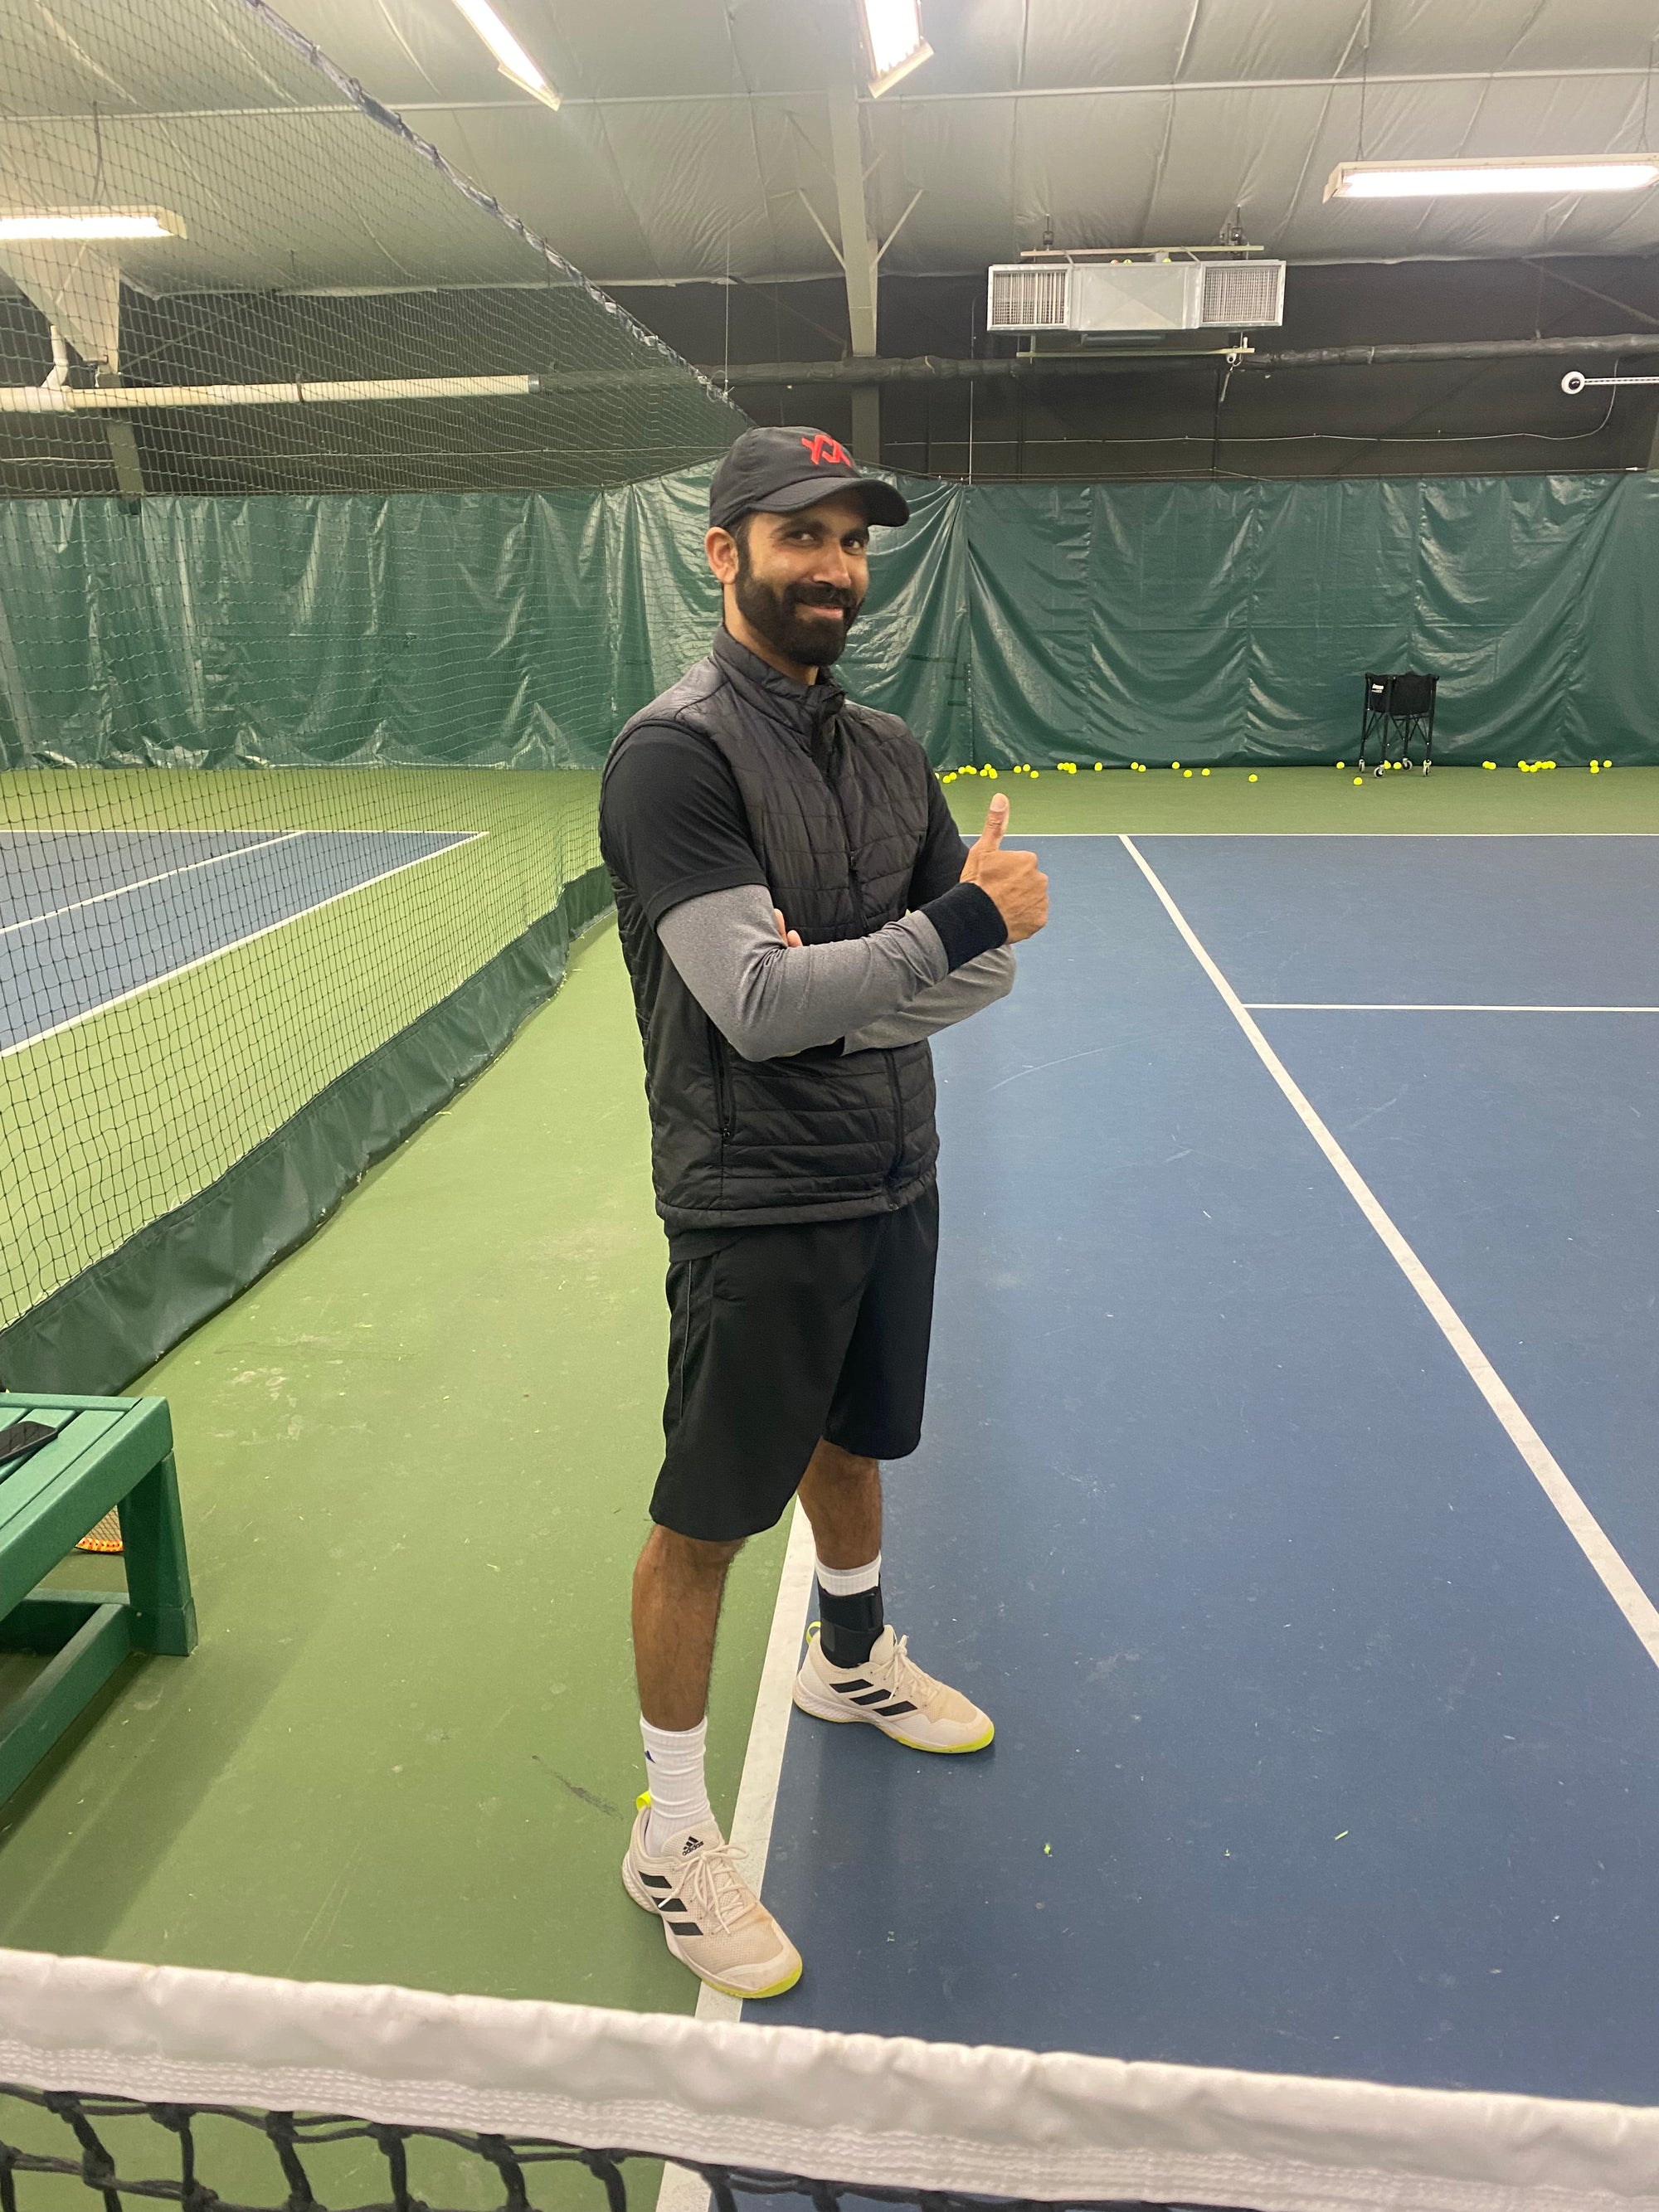 'Everyone wants to be here': a shared sentiment at the Fort Lee Racquet Club